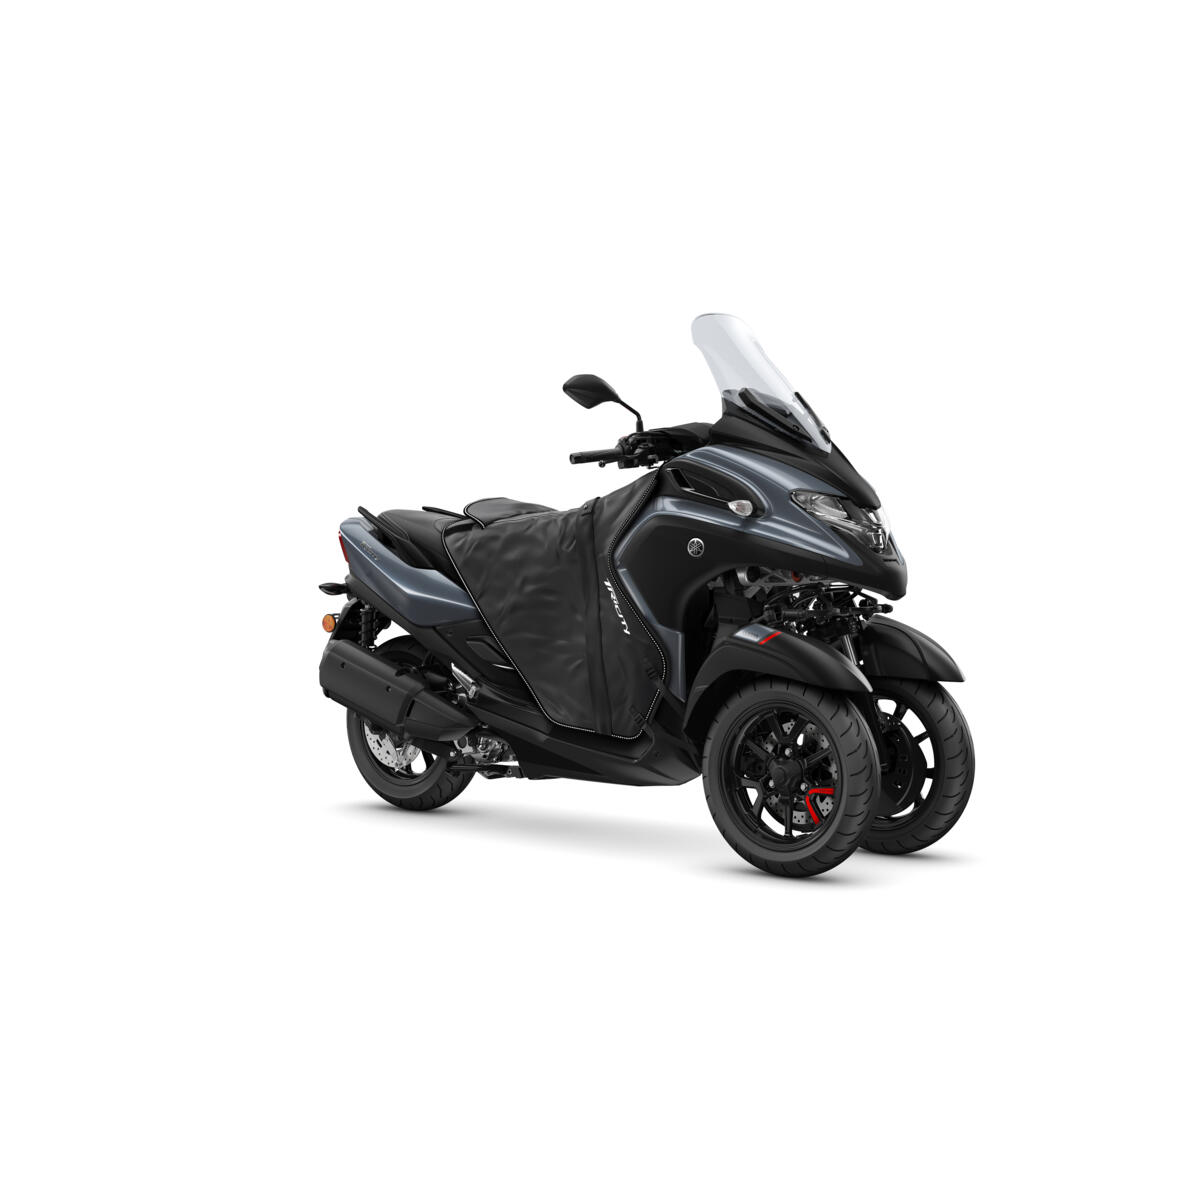 With its 3-wheel layout, the Tricity 300 gives a new feeling of stability and confidence, making it an ideal vehicle for year round riding, even in cold and bad weather. So now you’ve got a scooter that you can use in a range of conditions, we thought we’d create the Winter Pack featuring a water-resistant apron as well as handlebar grips heater. Available now from your Yamaha dealer who will be happy to fit these high quality Genuine Accessories to your Tricity 300.